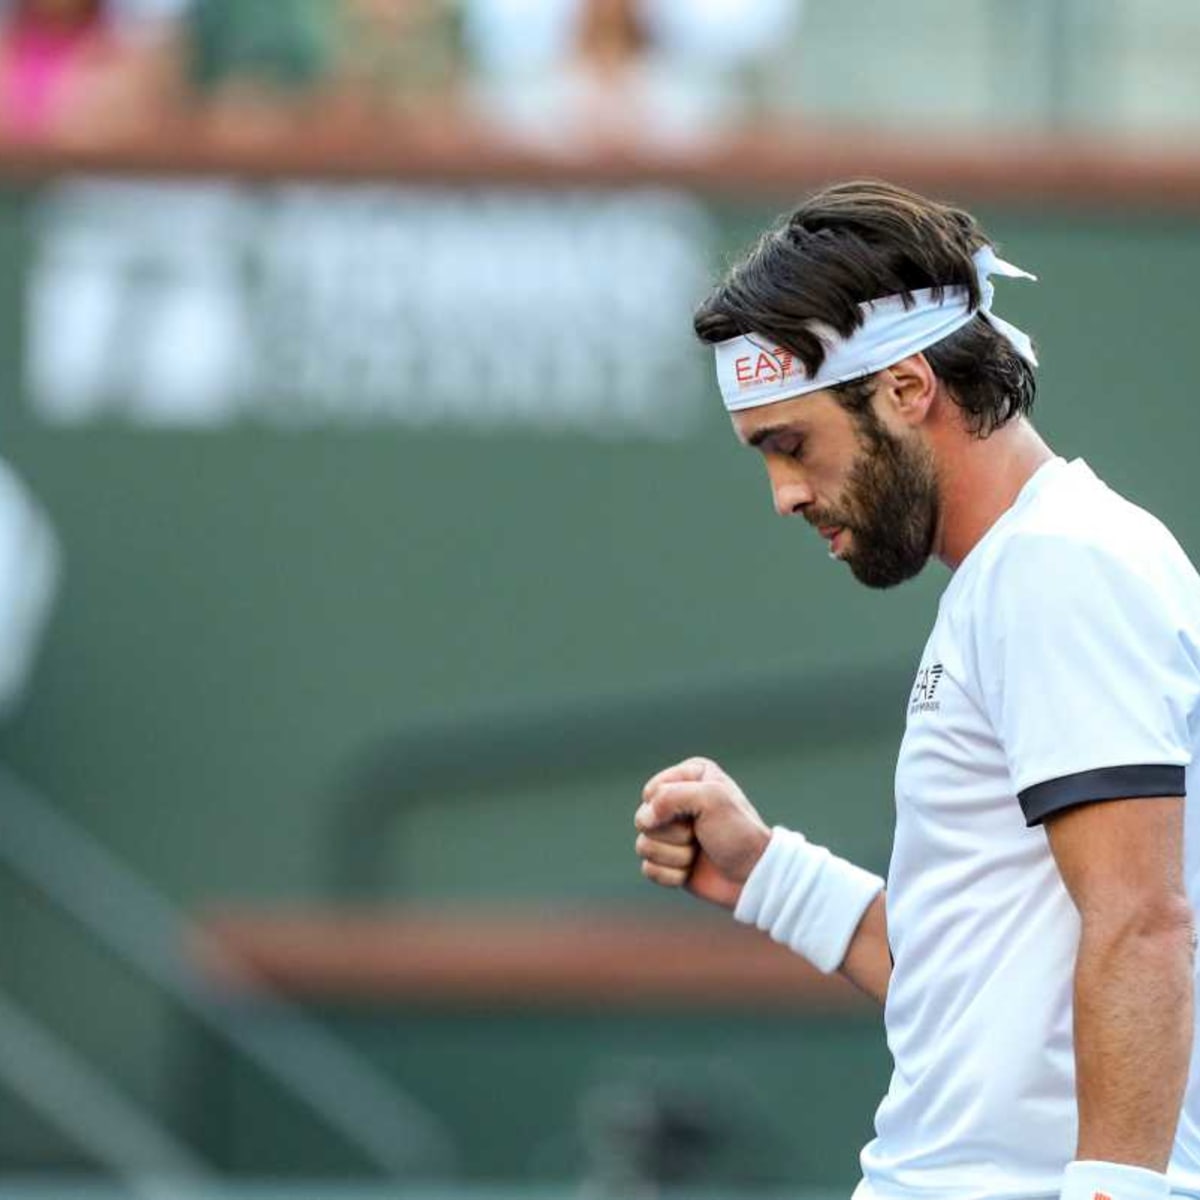 BNP Paribas Open, ATP Singles Final Live Stream Watch Online, TV Channel, Start Time - How to Watch and Stream Major League and College Sports